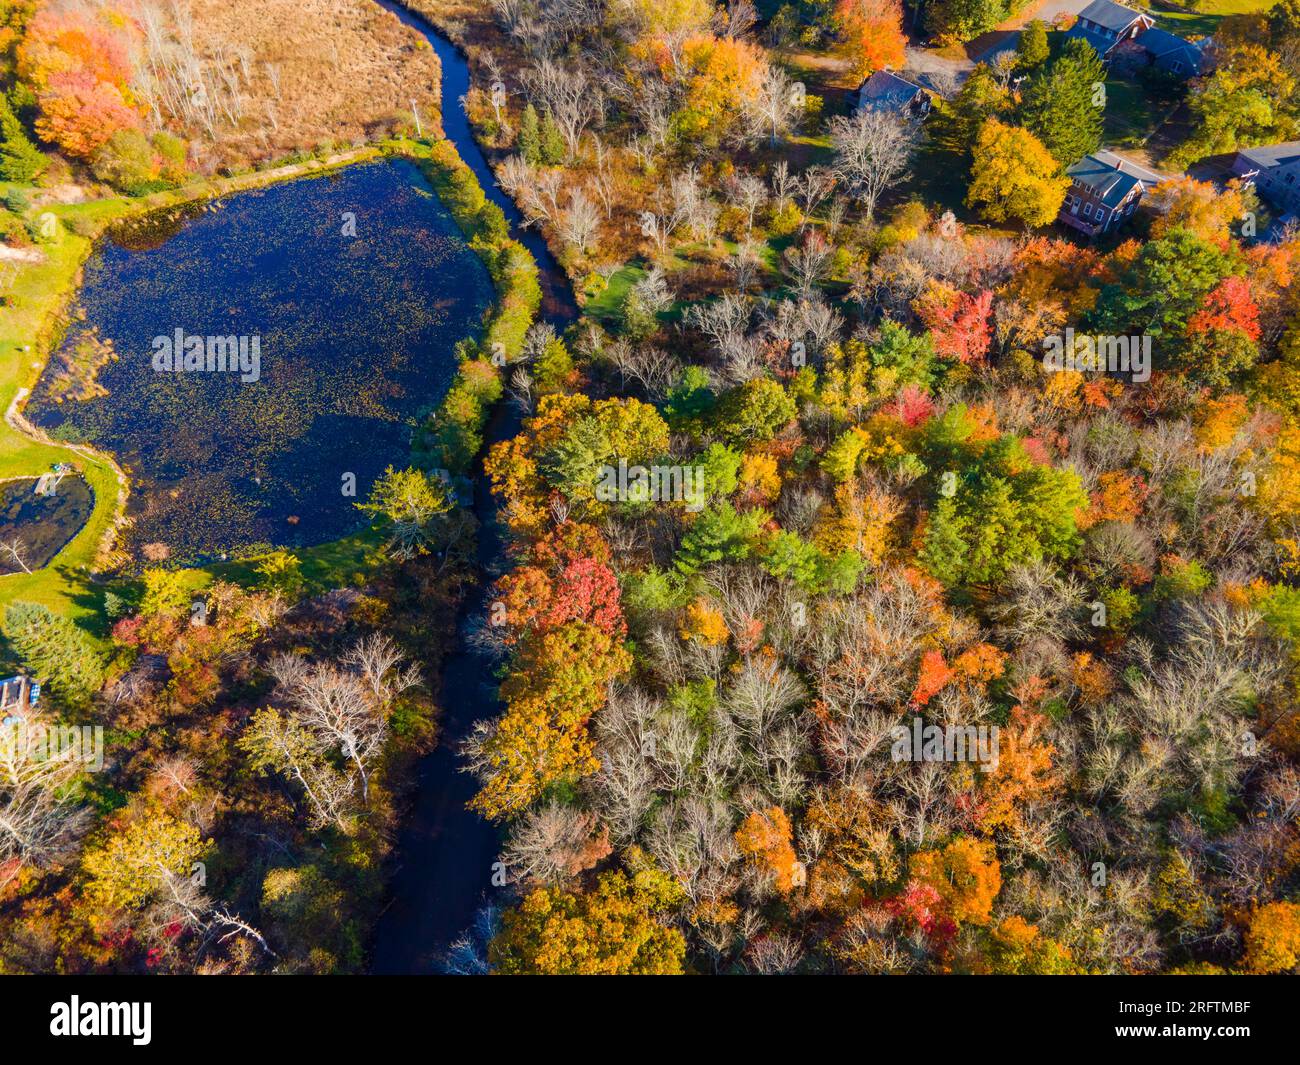 Furnace Brook top view with fall foliage in town of Kingston, Massachusetts MA, USA. Stock Photo